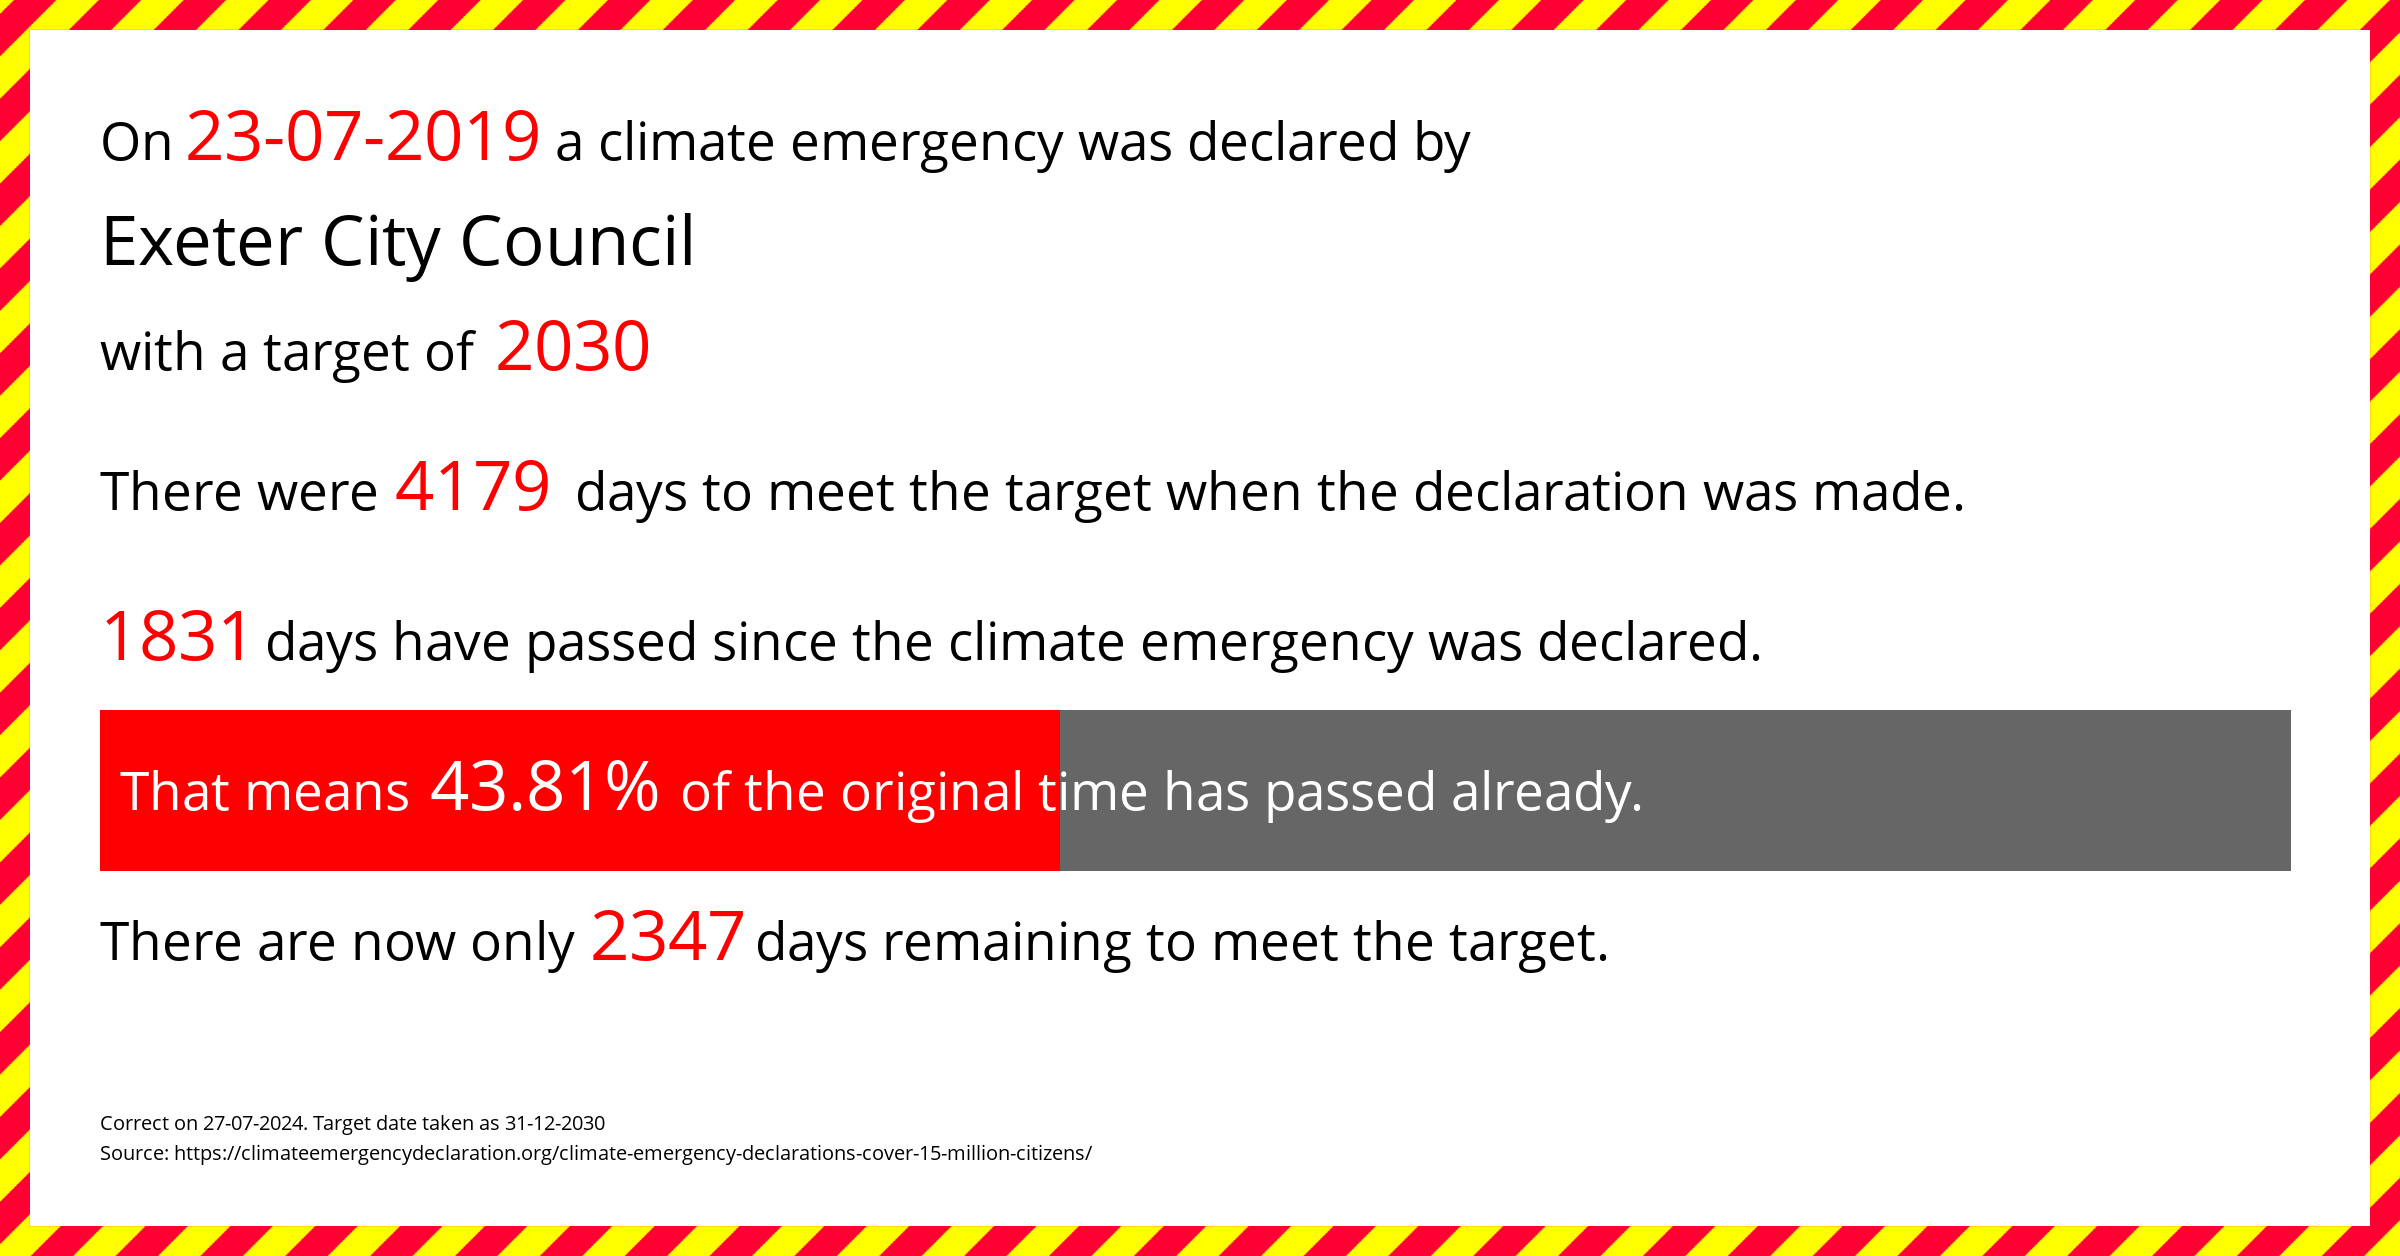 Exeter City Council declared a Climate emergency on Tuesday 23rd July 2019, with a target of 2030.